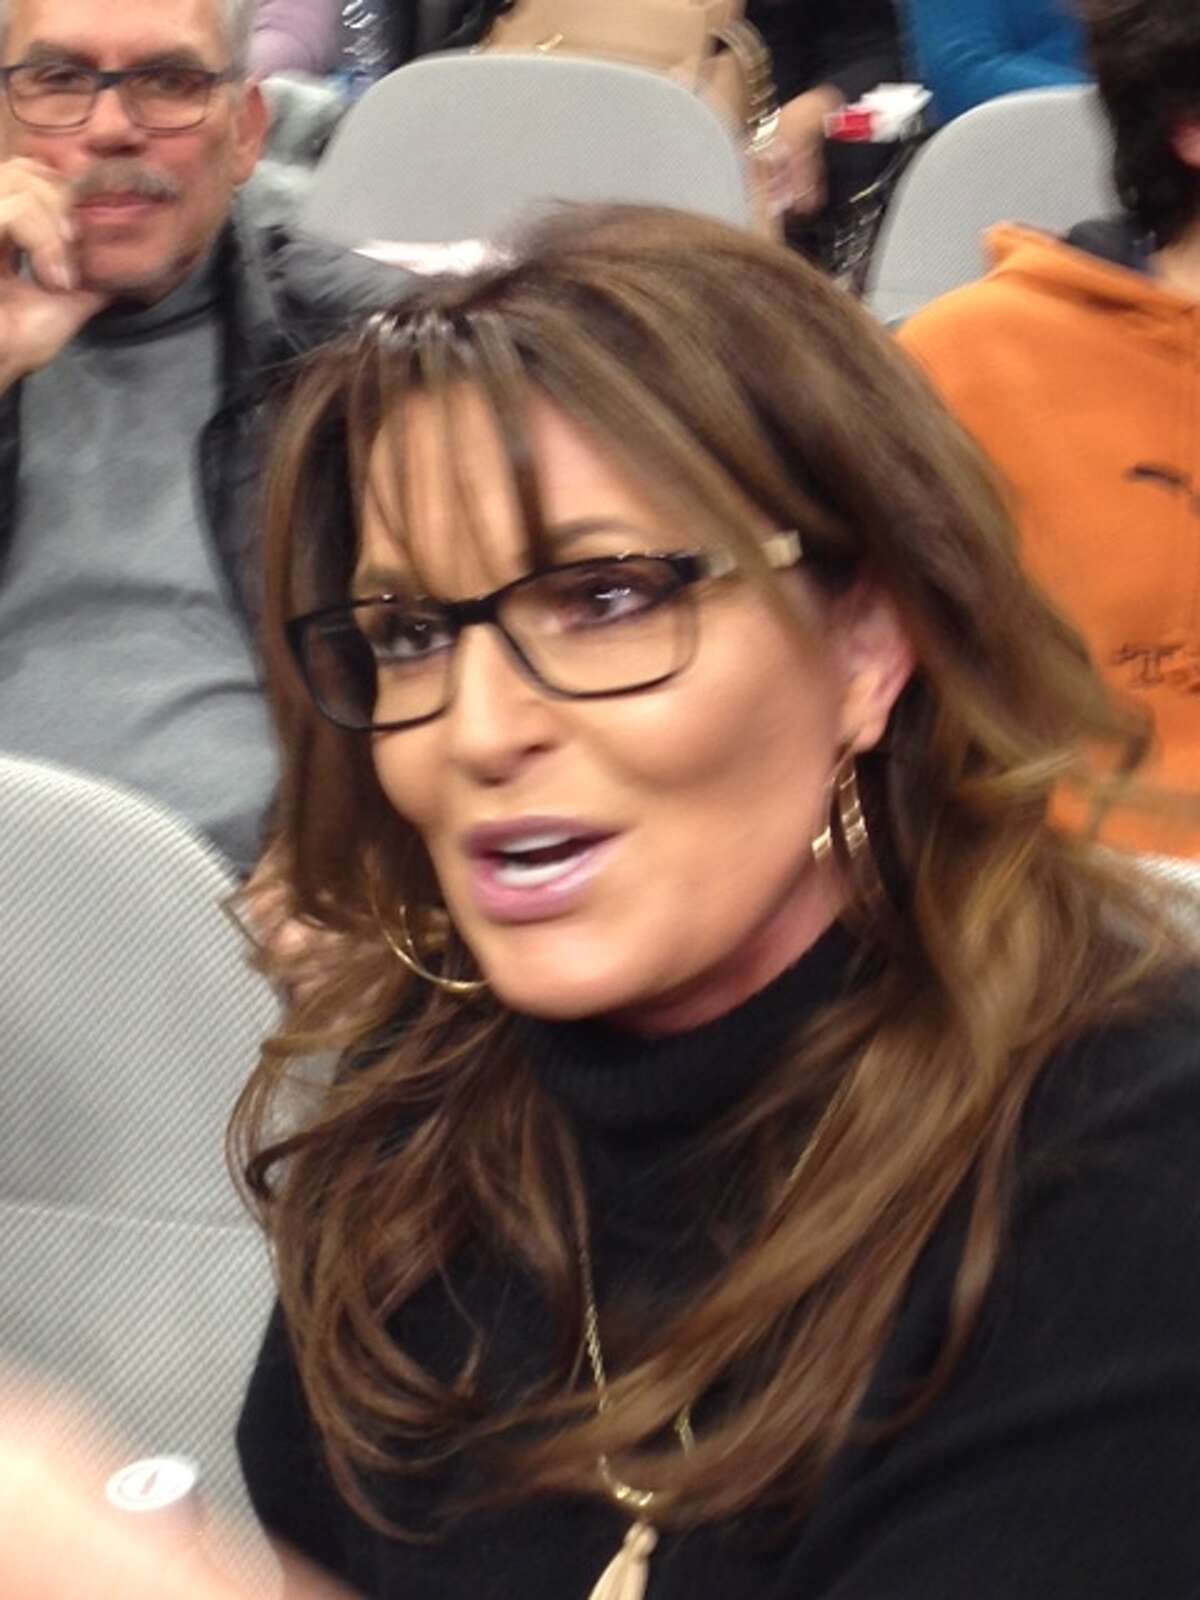 Sarah Palin, the 2008 Republican vice-presidential candidate, attended Monday's Spurs-Nuggets game at the AT&T Center.